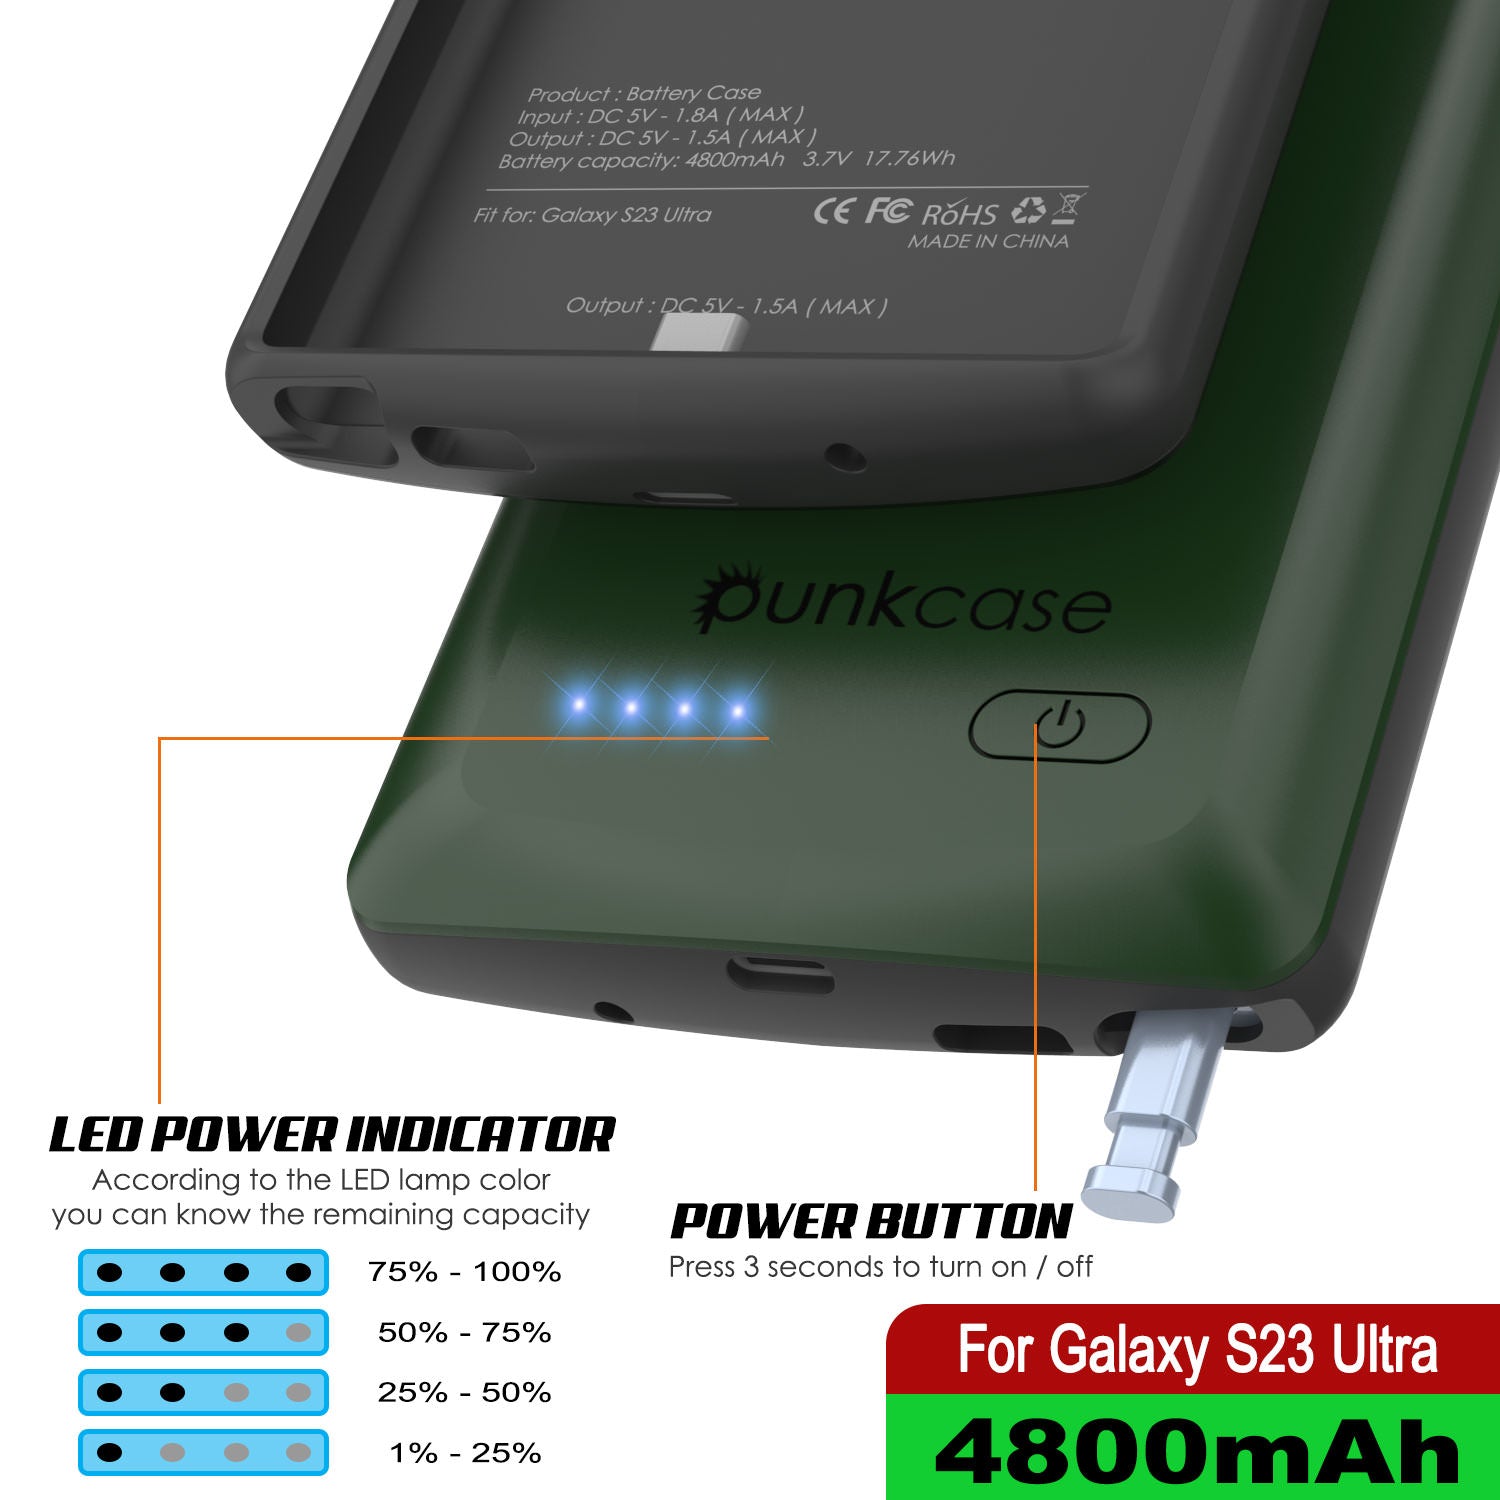 PunkJuice S24+ Plus Battery Case Green - Portable Charging Power Juice Bank with 5000mAh